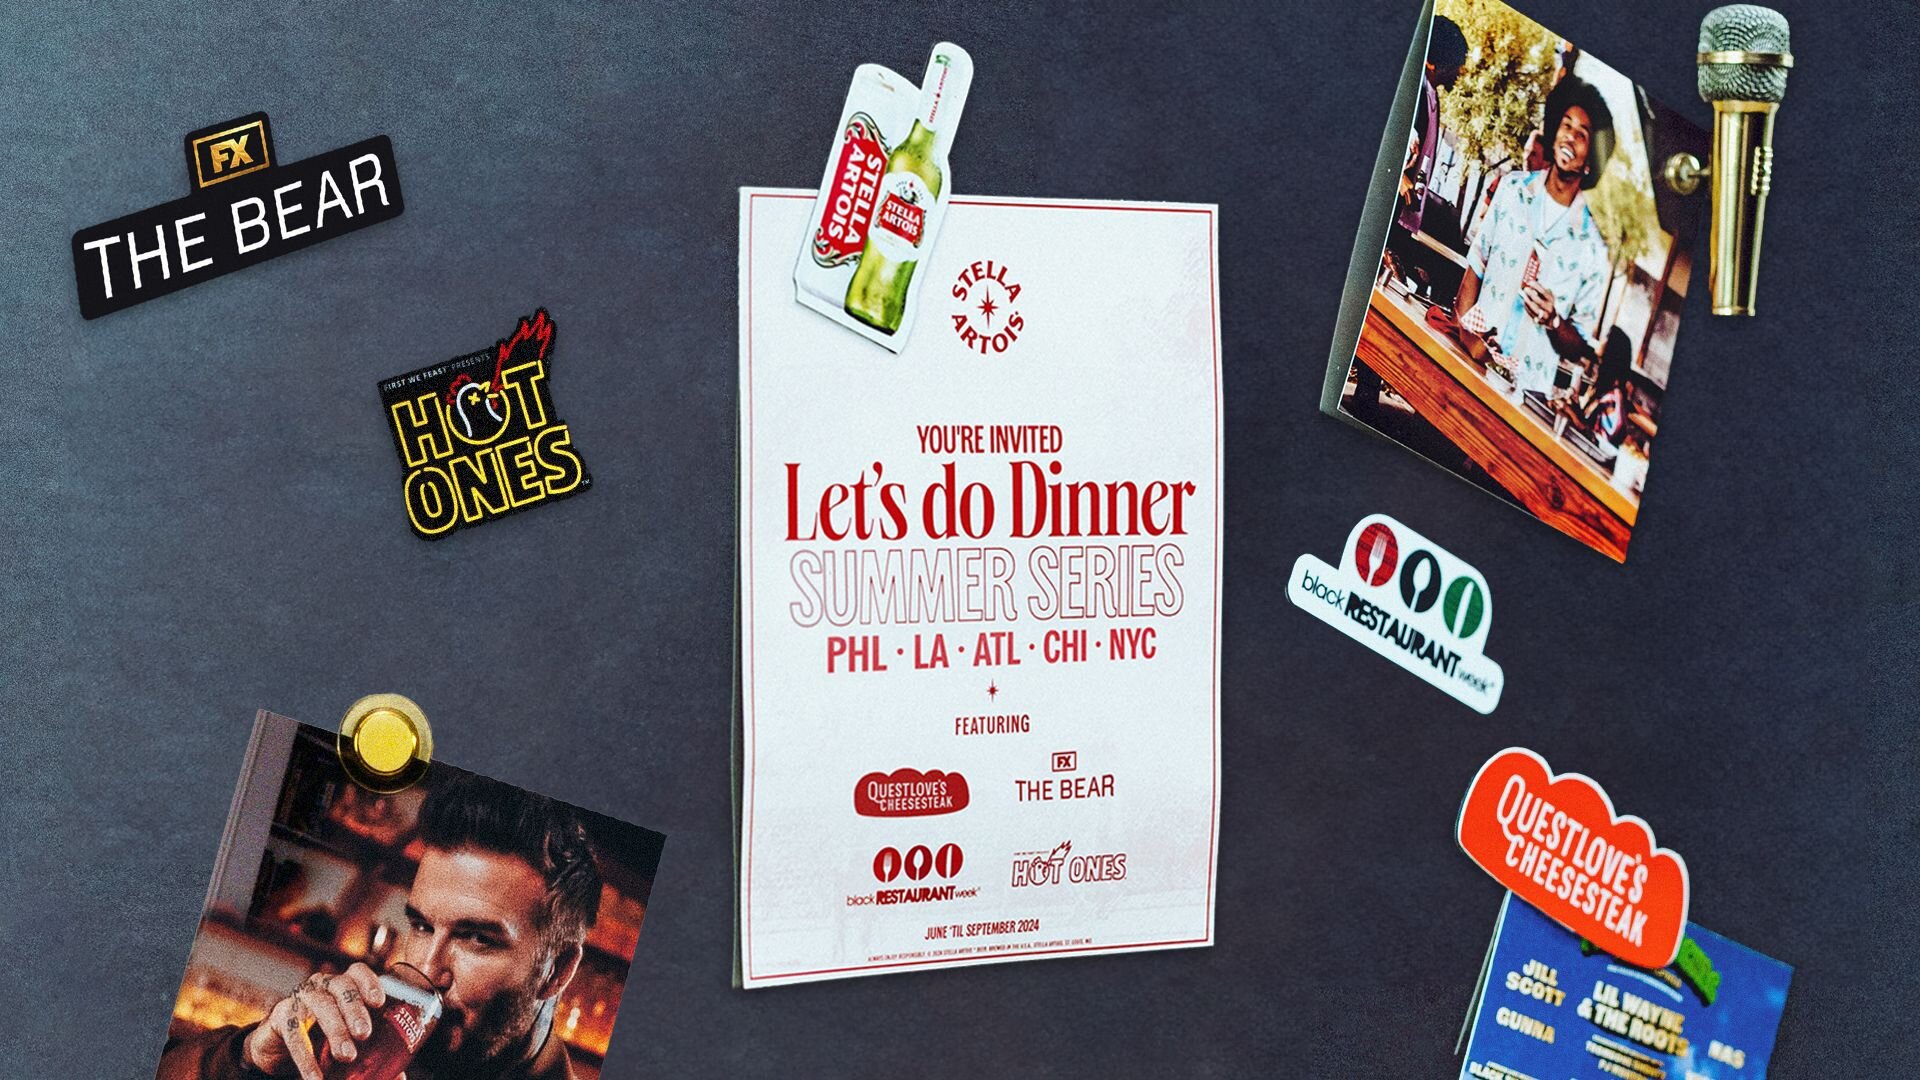 Stella Artois’ “Let’s do Dinner” Series Returns with One-of-a-Kind Experiences All Summer Long